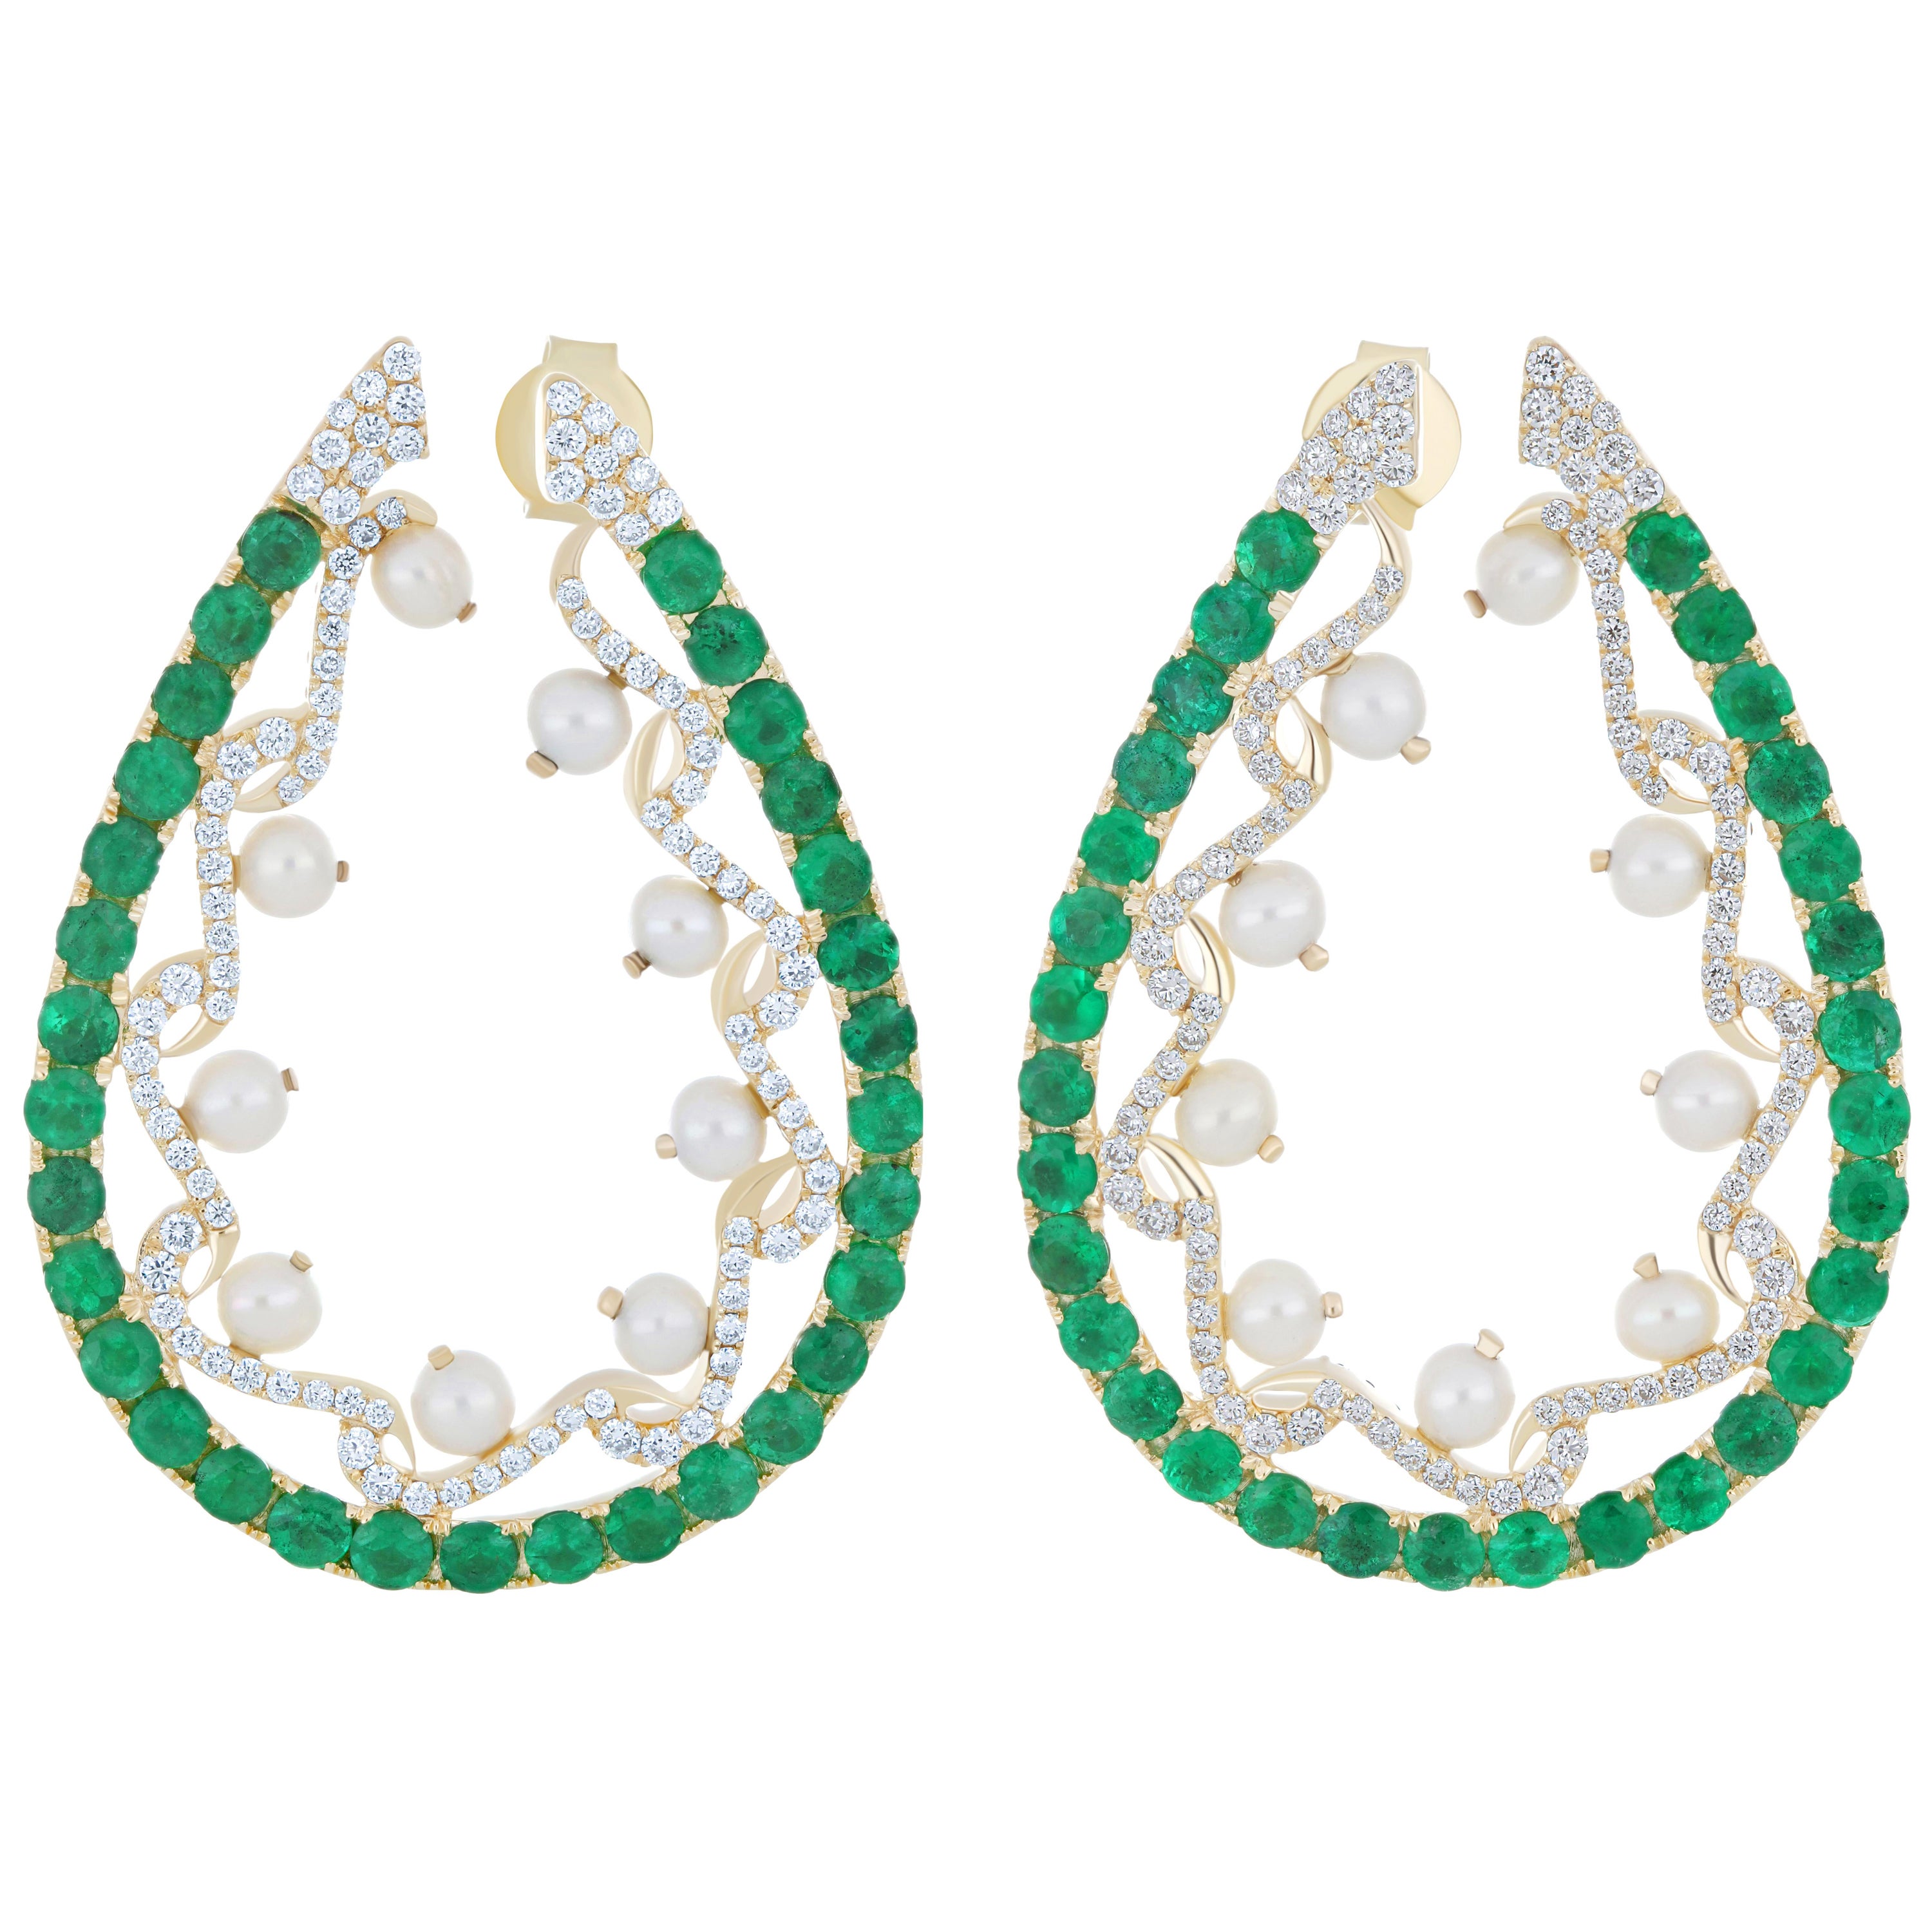 Emerald, Pearl and Diamond Stud Earrings in 14K Yellow Gold Hand-Craft Earring